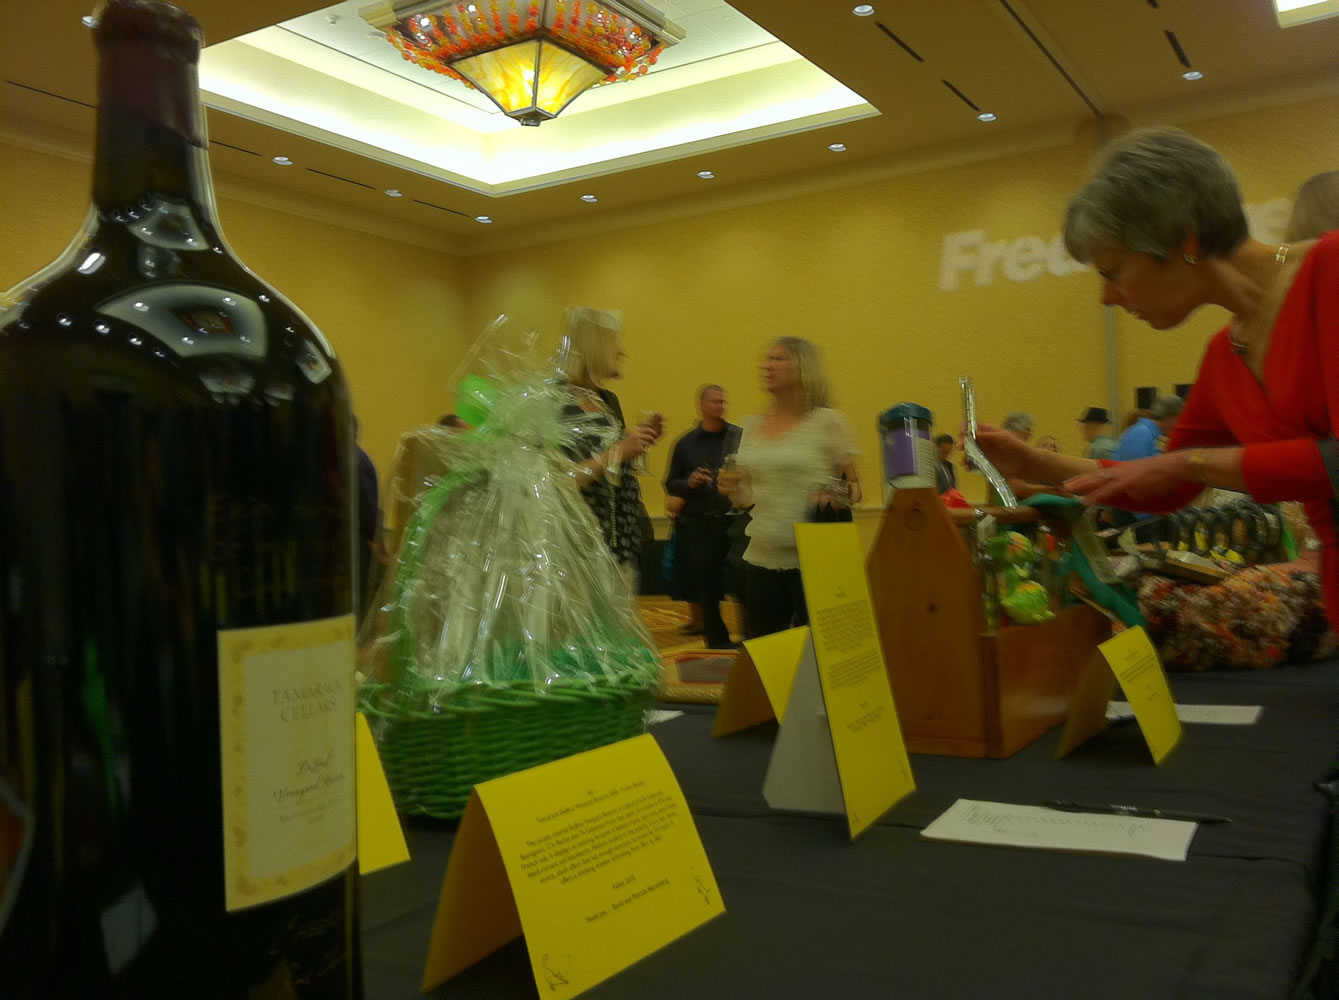 Supporters of the Humane Society for Southwest Washington take part in a silent auction Saturday as part of the group's &quot;It's a Wonderful Life&quot; dinner and auction at the Hilton Vancouver Washington.The 9 liter bottle of wine photographed sold for $563.